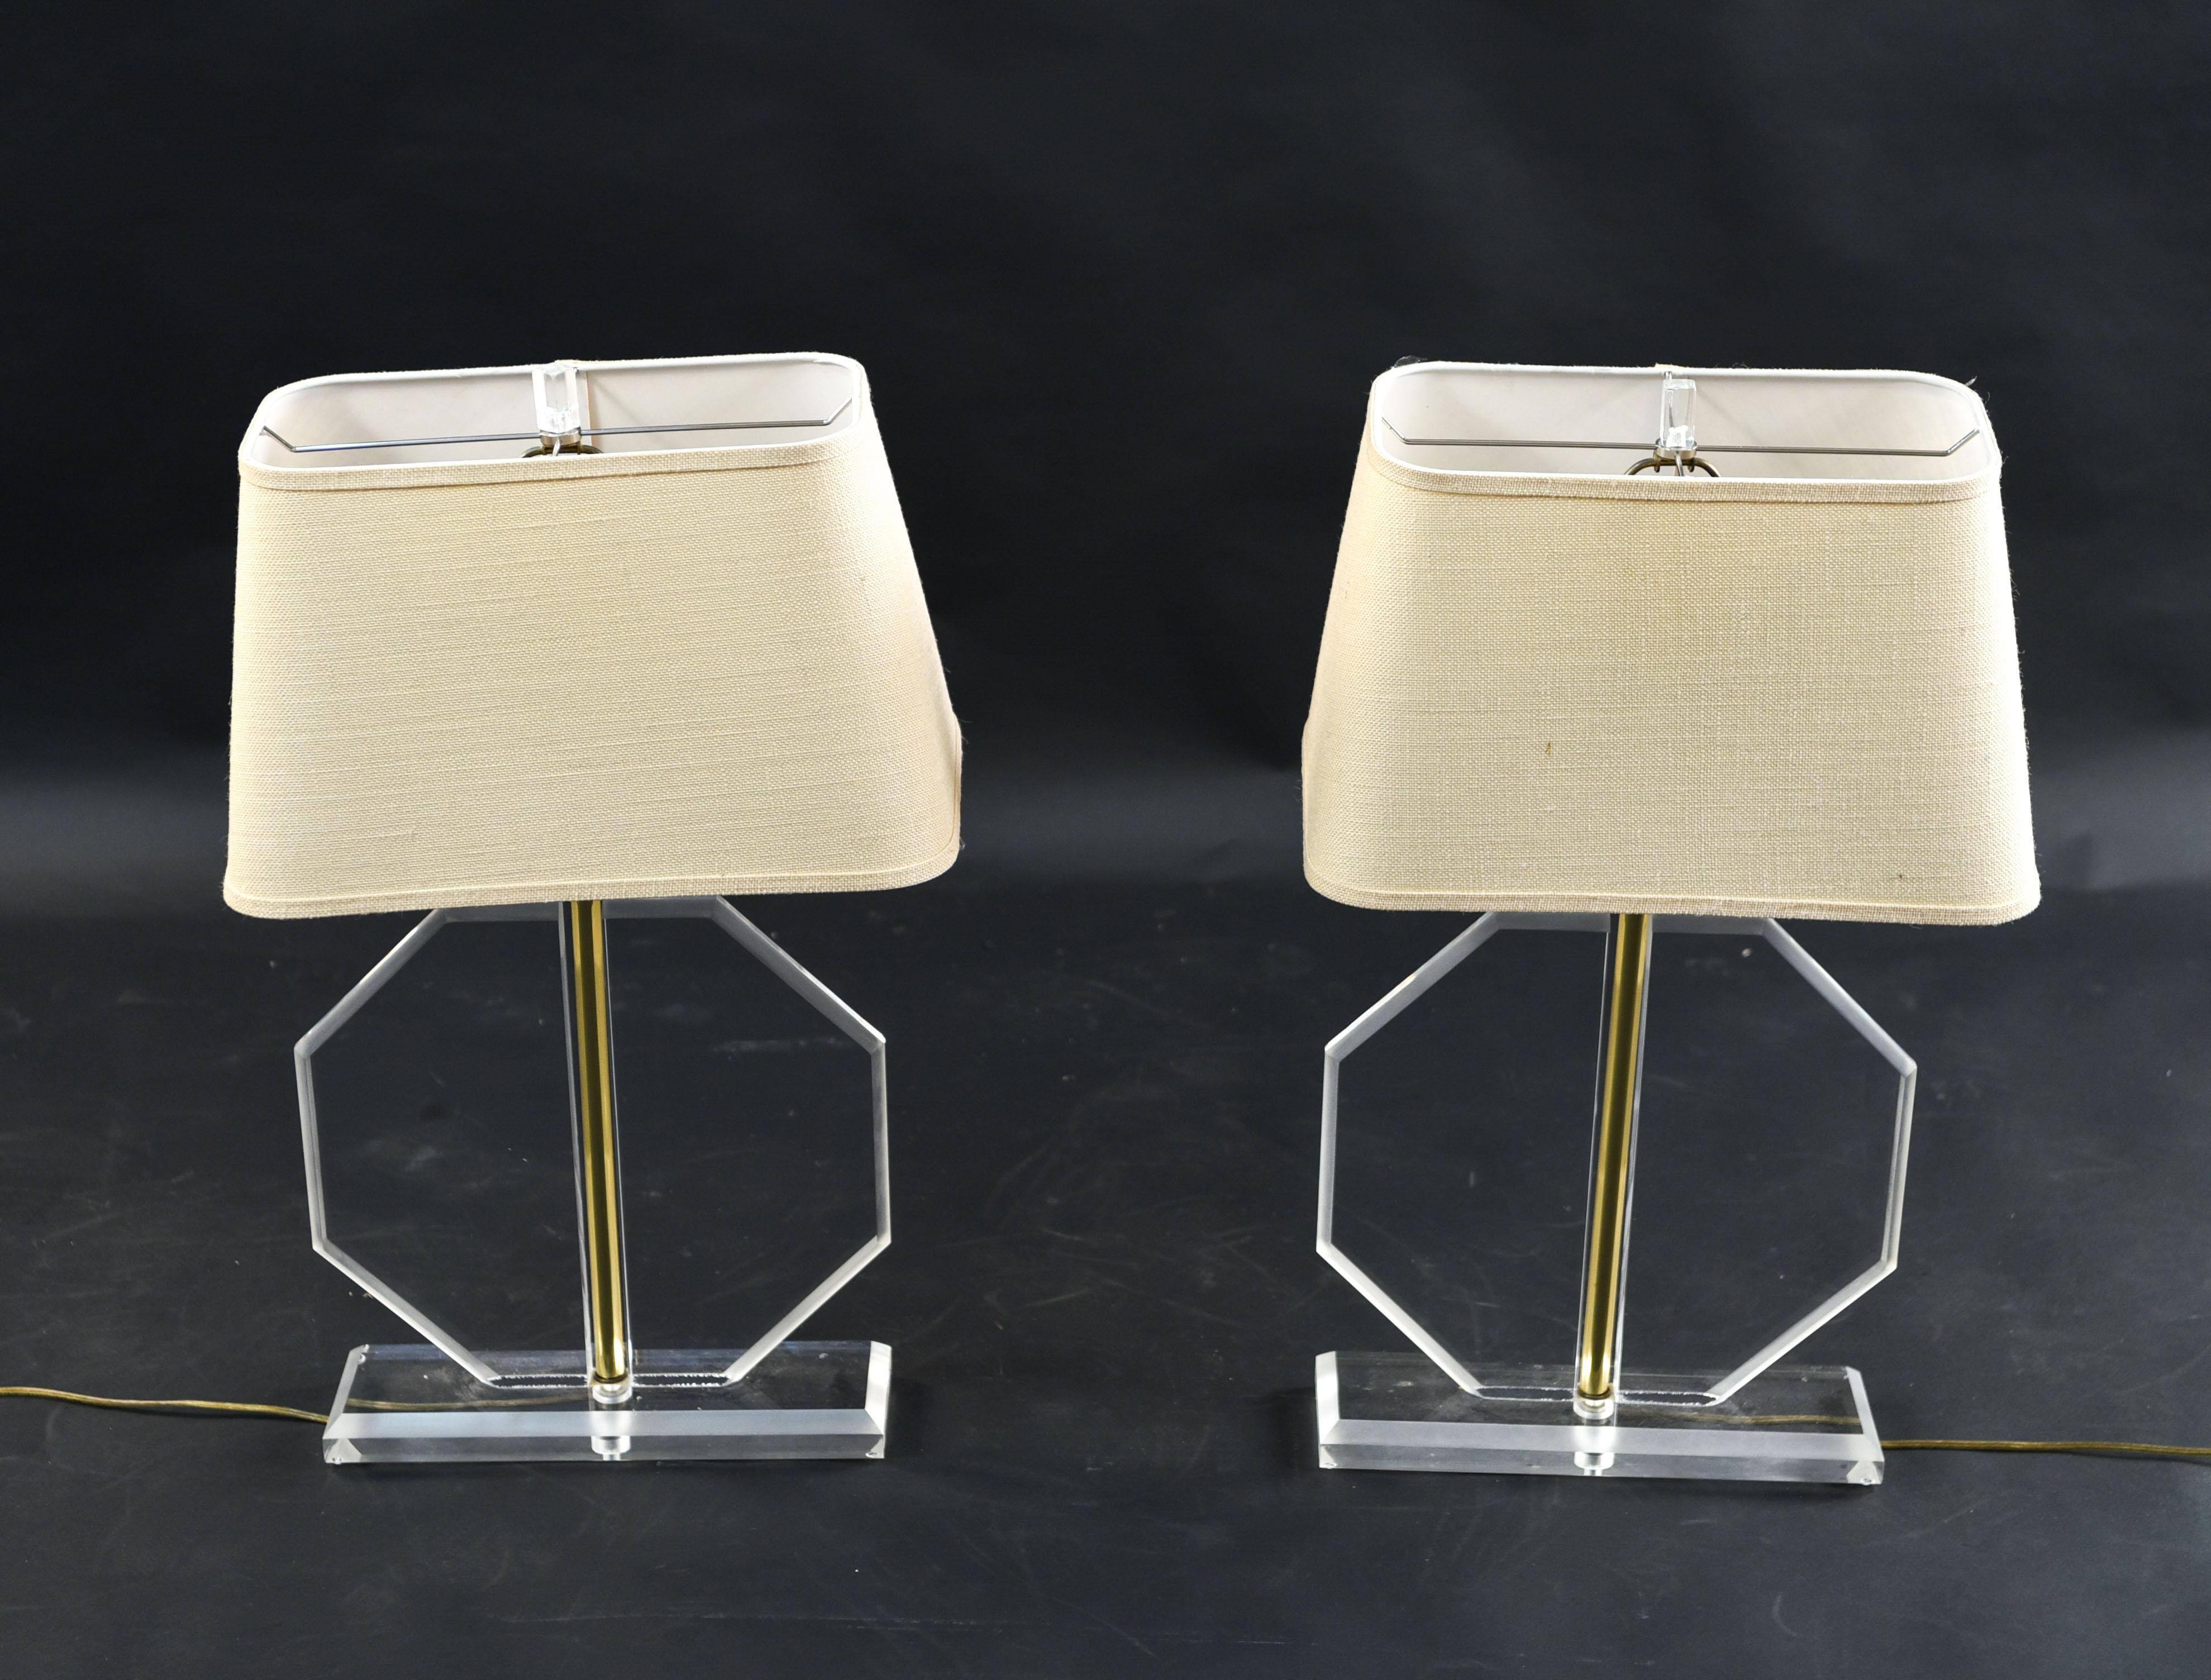 These midcentury Lucite table lamps are of an octagonal form. Due to their thin shape, they would work well on either side of a console, or in another narrow space.